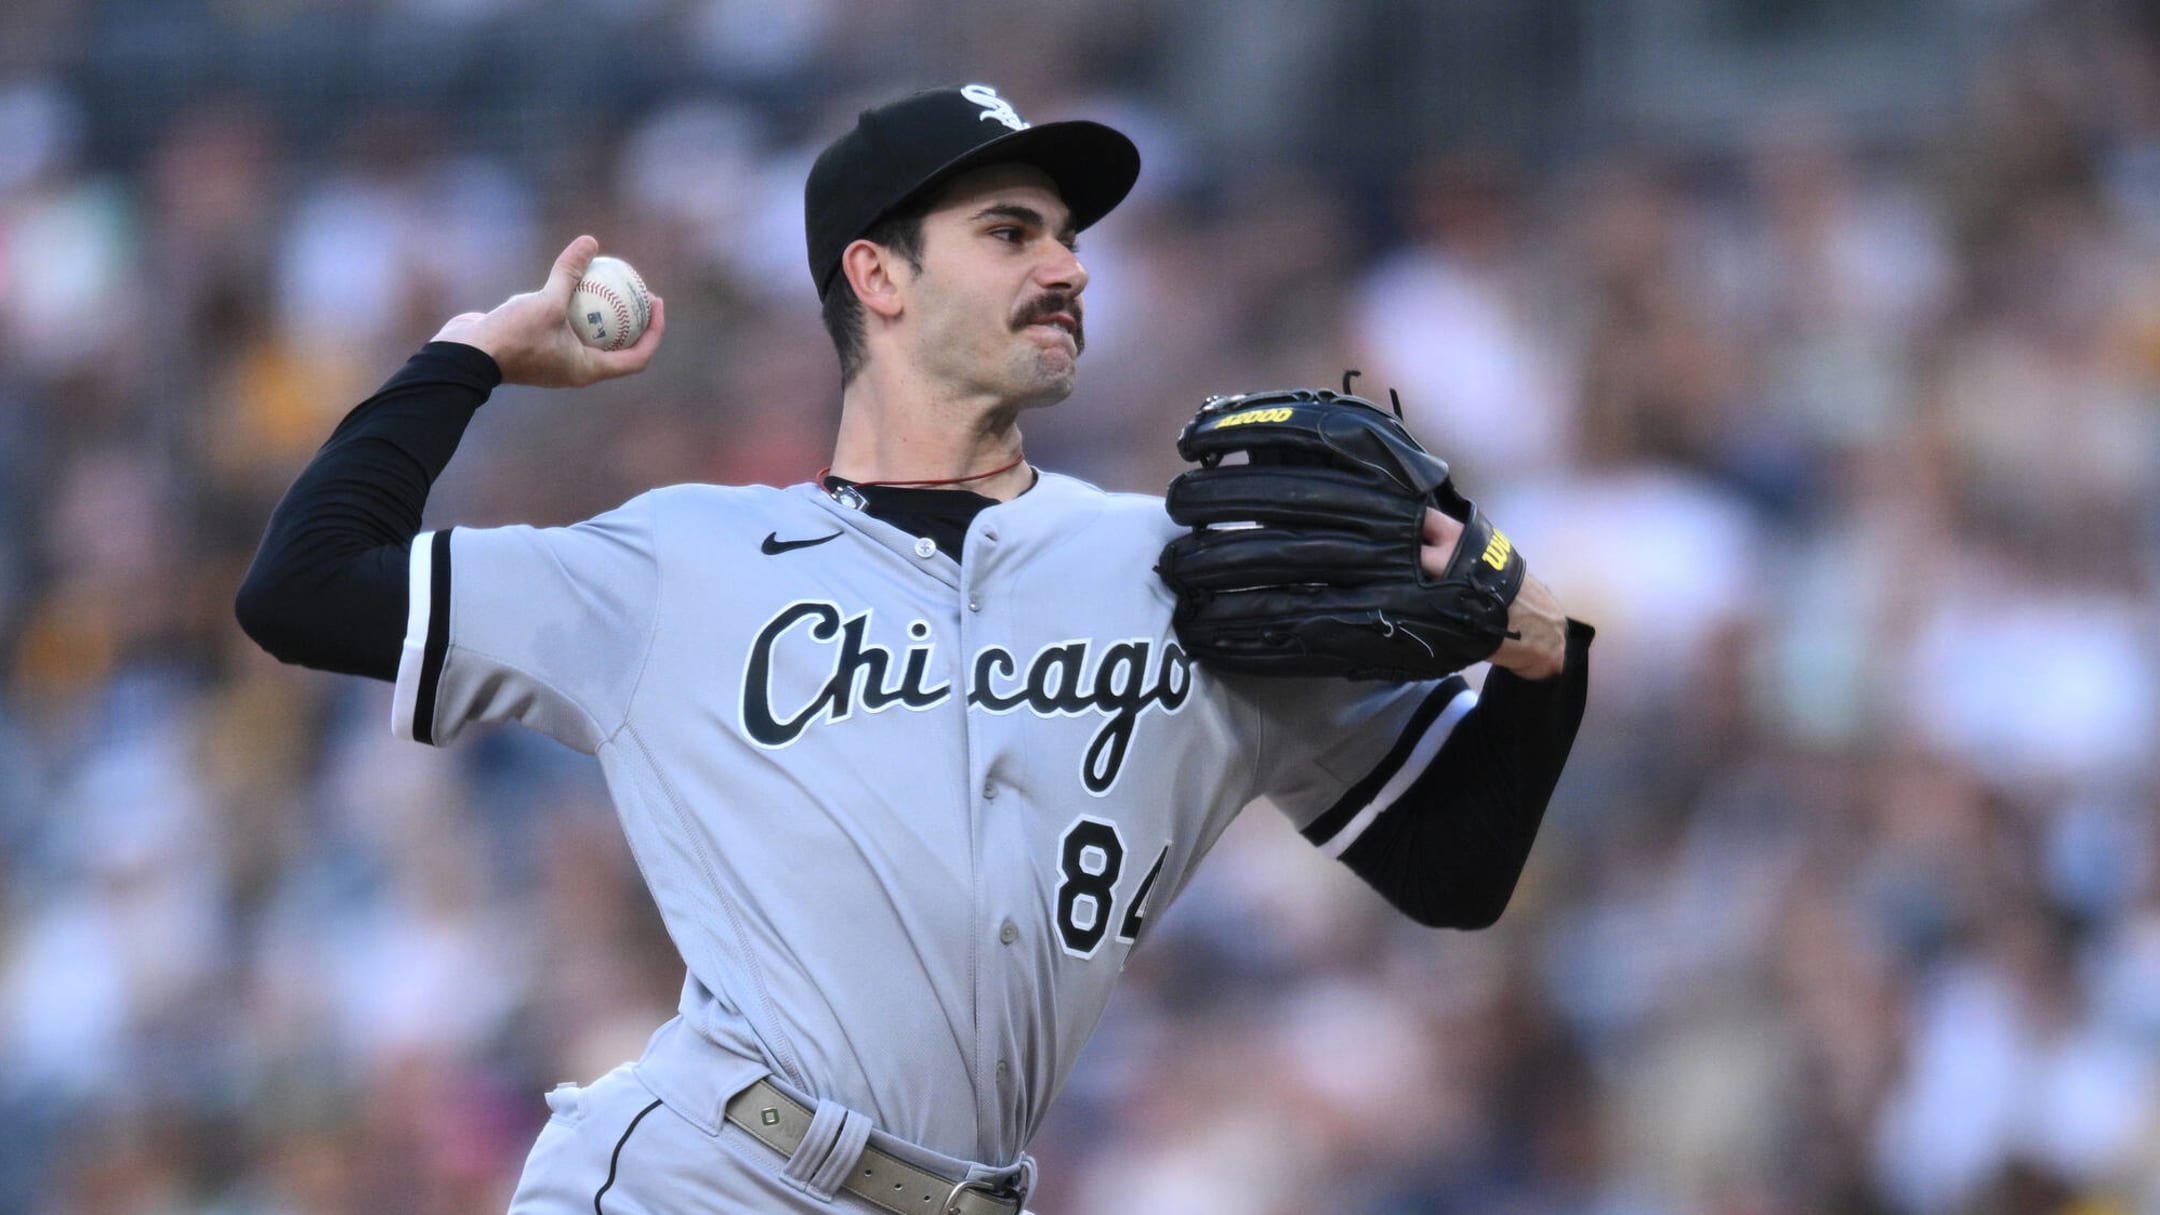 White Sox Pitcher, Dylan Cease, Meditates to Stay Calm